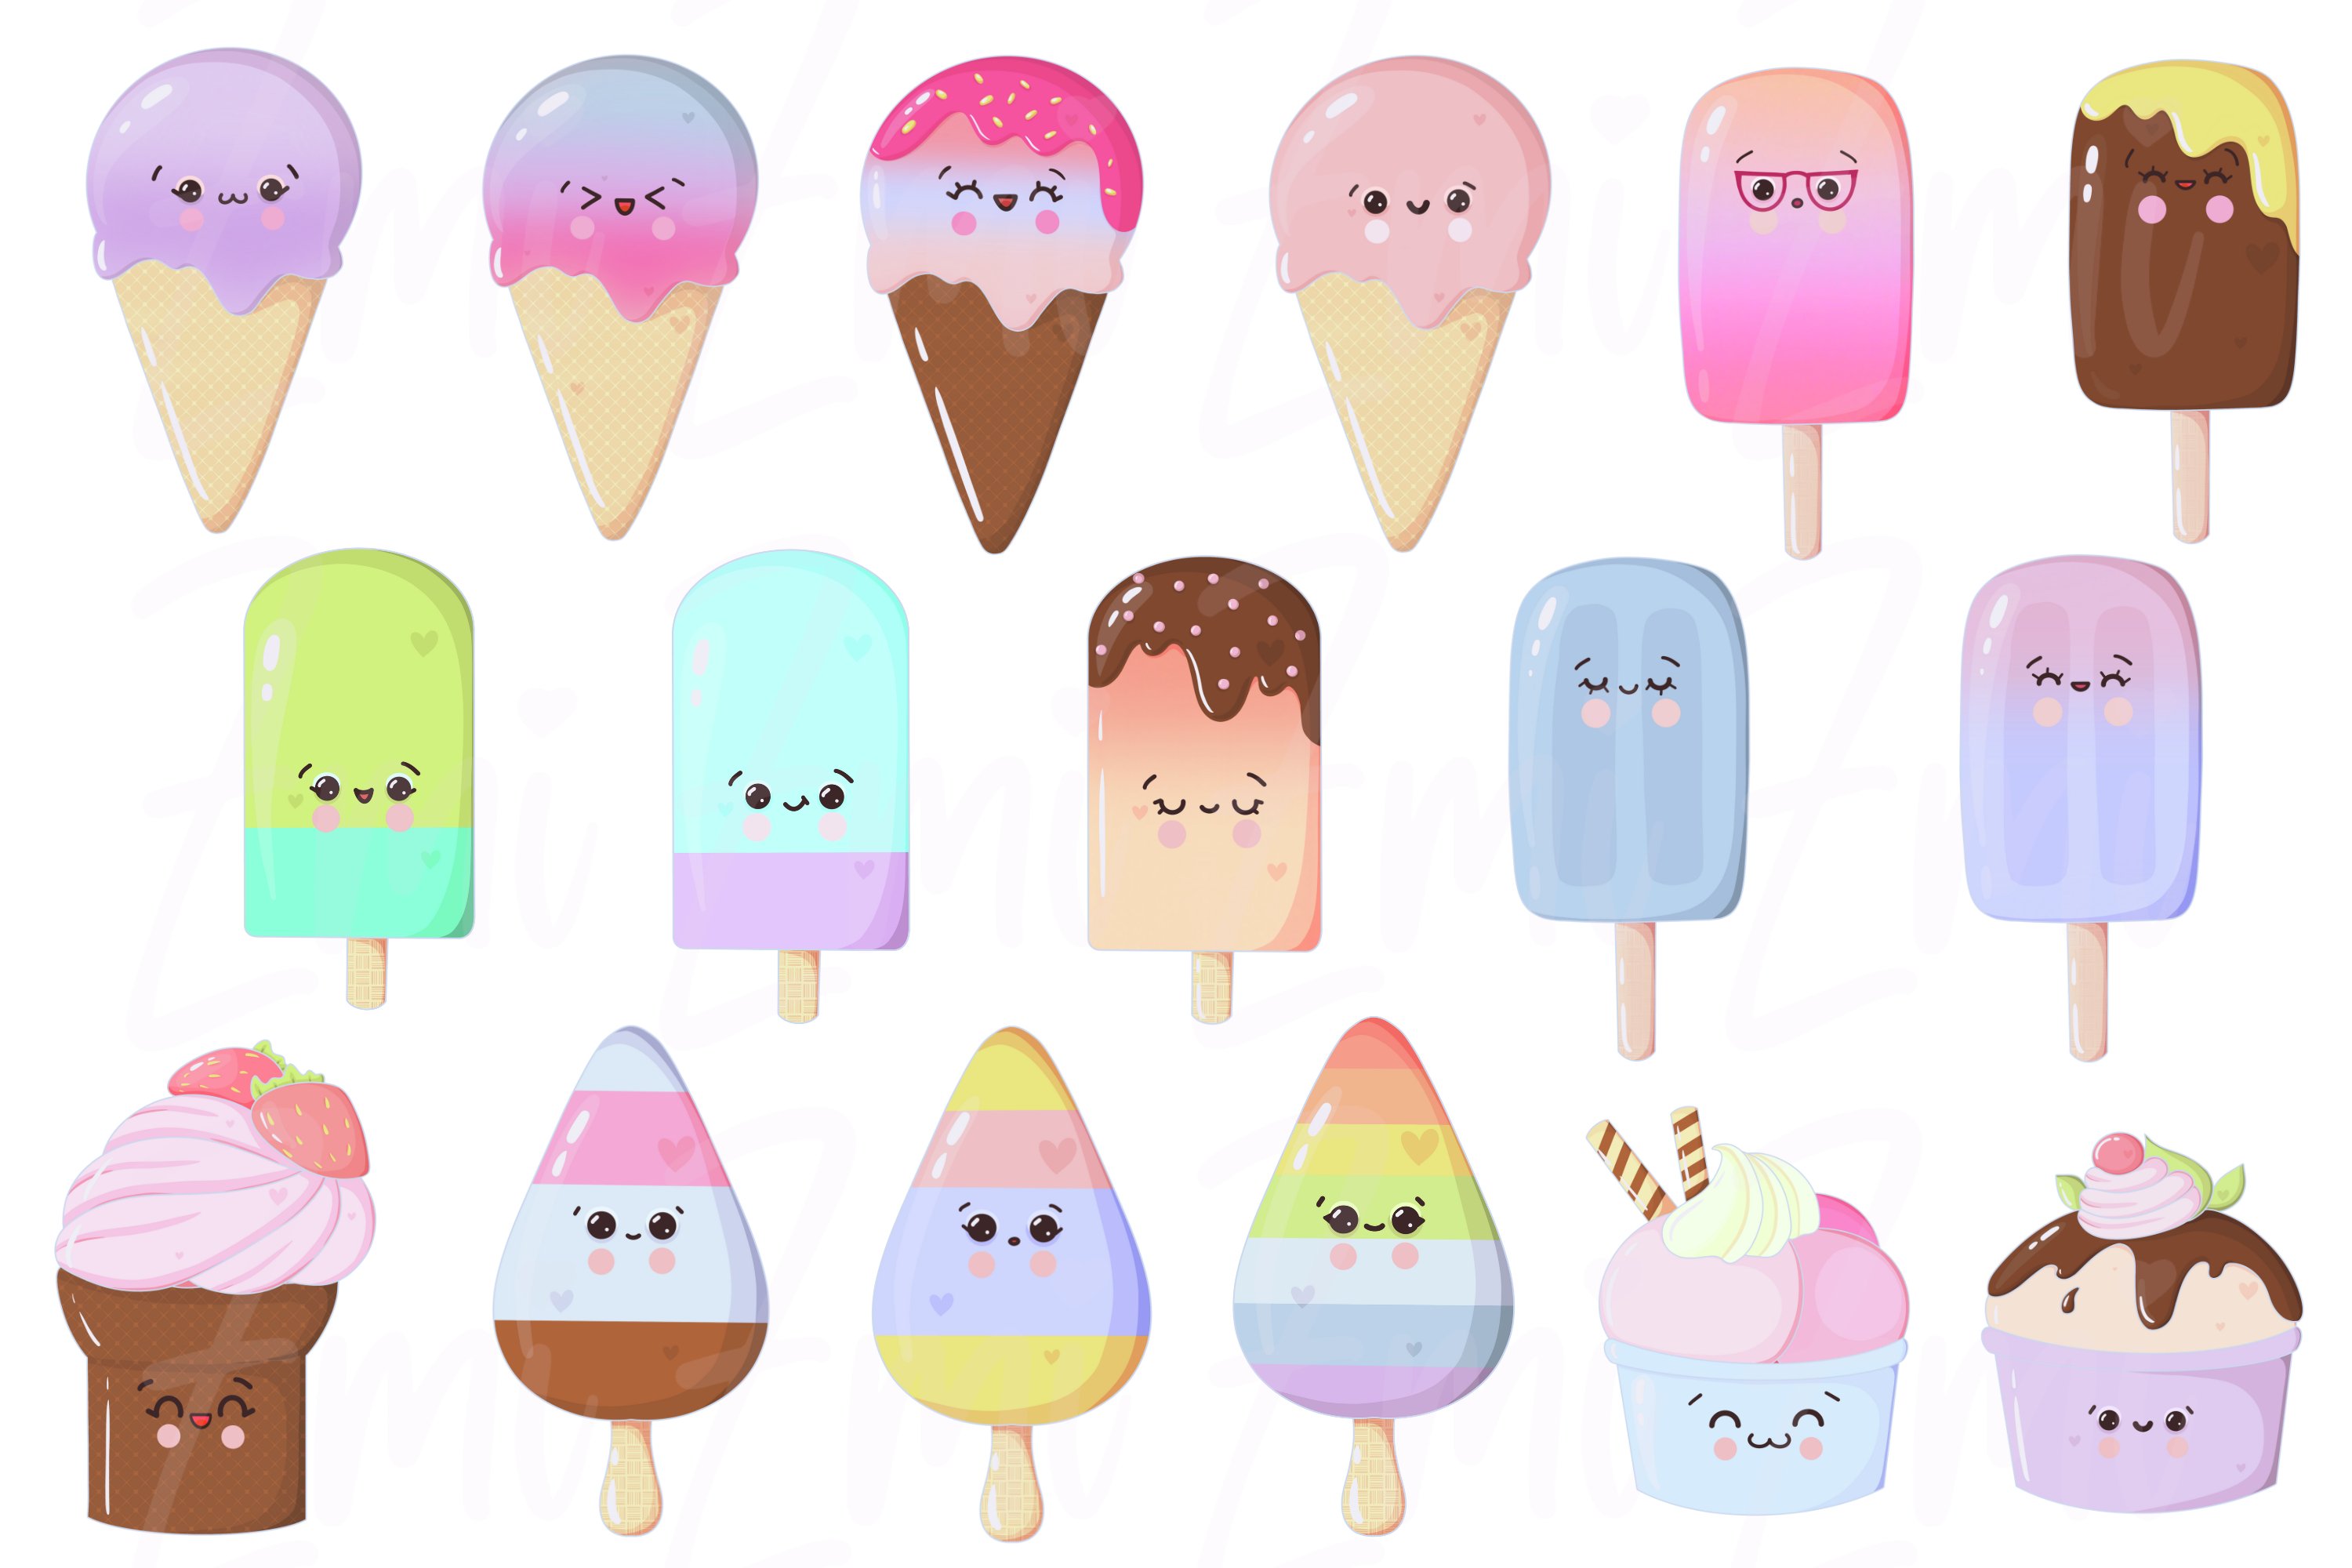 Bundle of different illustrations of kawaii popsicle on a white background.